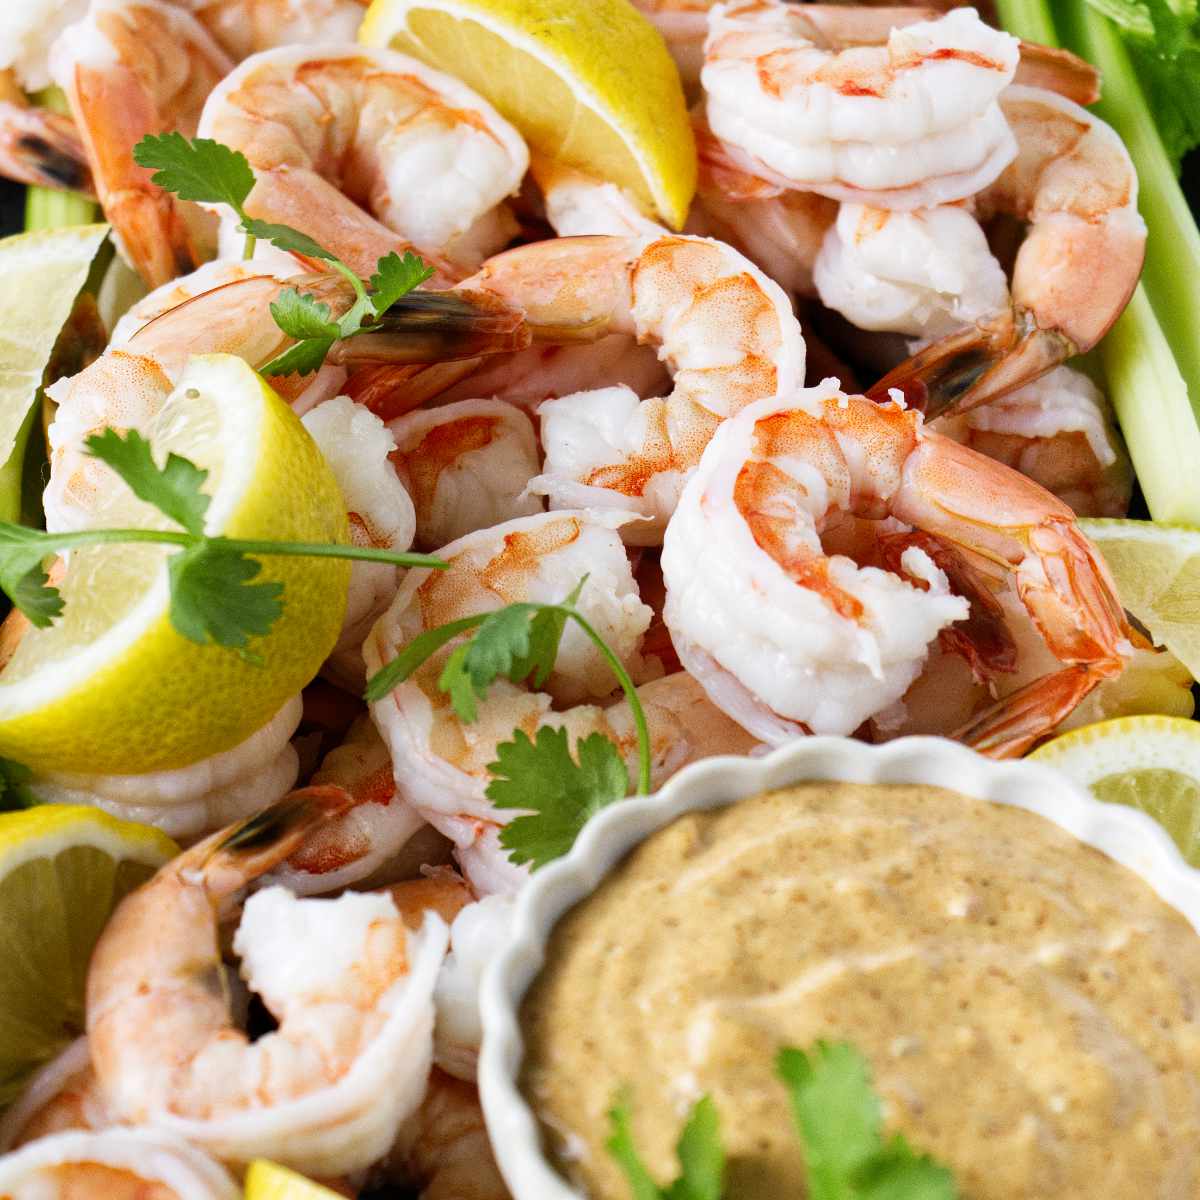 Boiled shrimp on a platter with cocktail sauce and lemon slices.